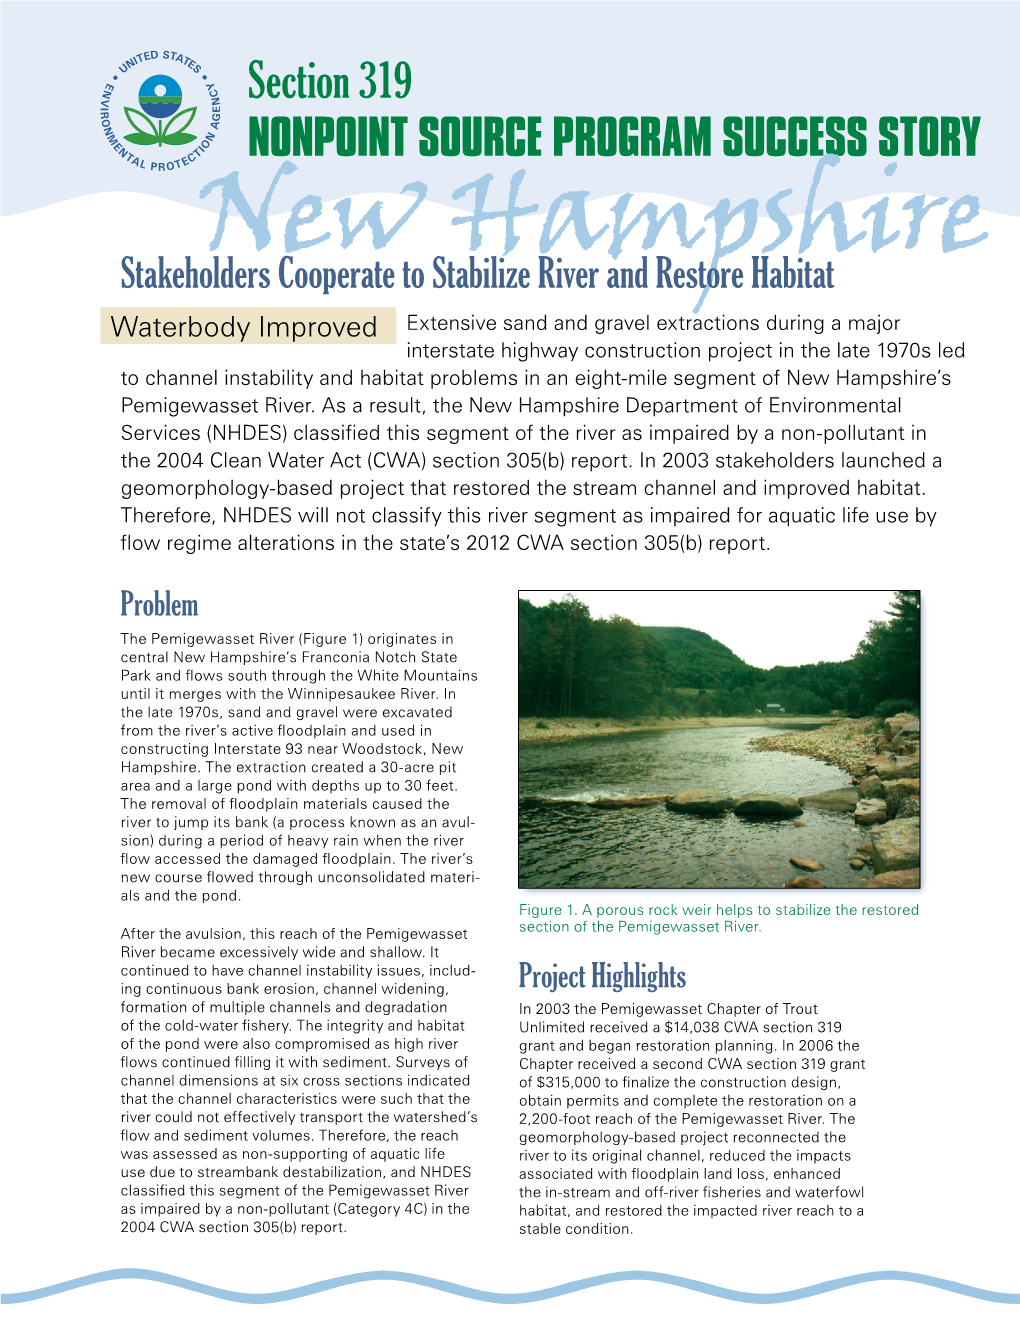 New Hampshire's Pemigewasset River, Section 319 Success Story